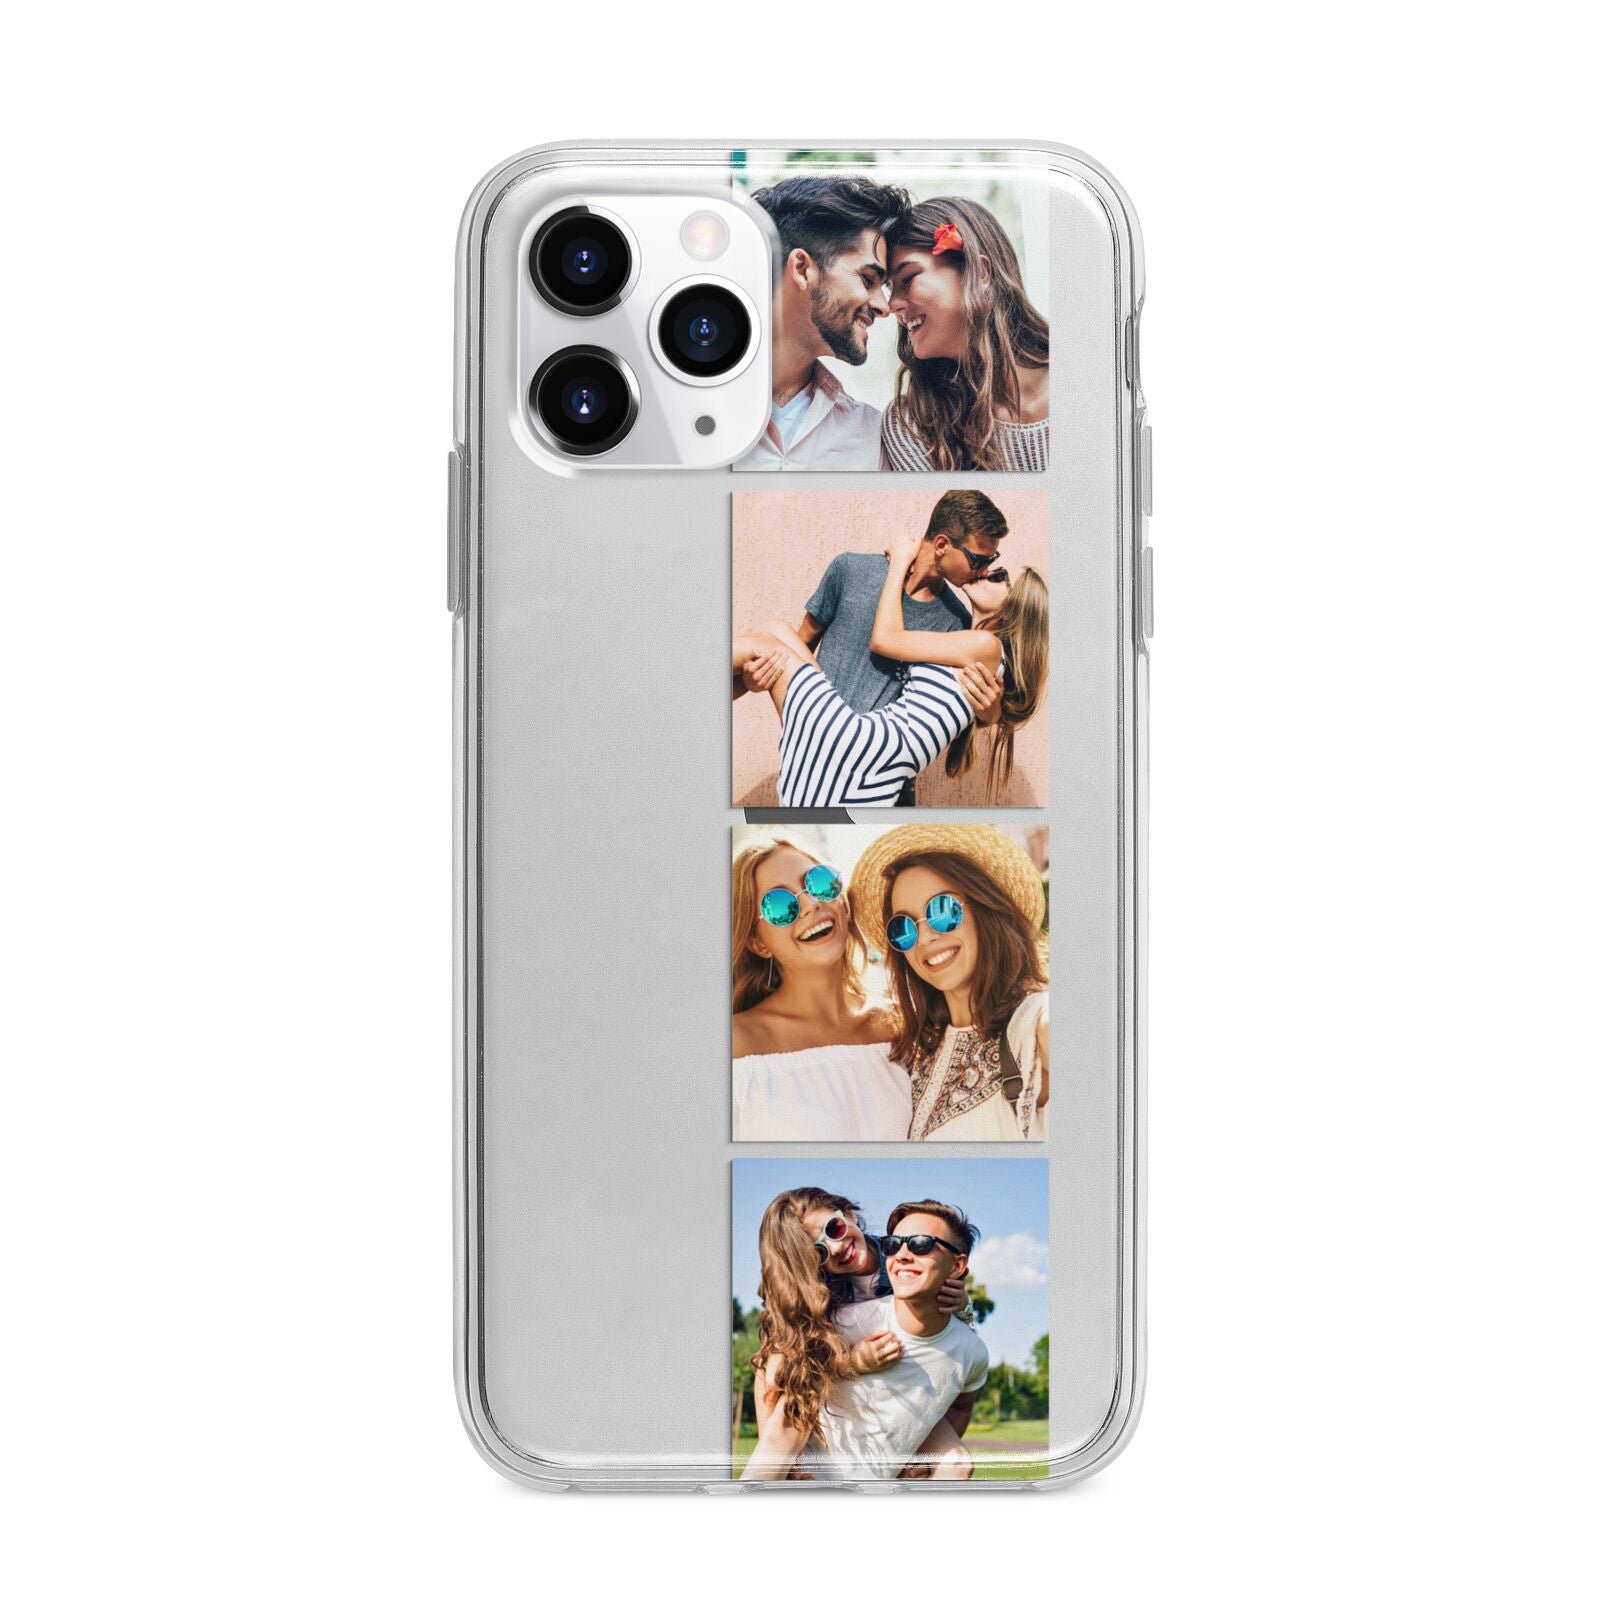 Photo Strip Montage Upload Apple iPhone 11 Pro Max in Silver with Bumper Case